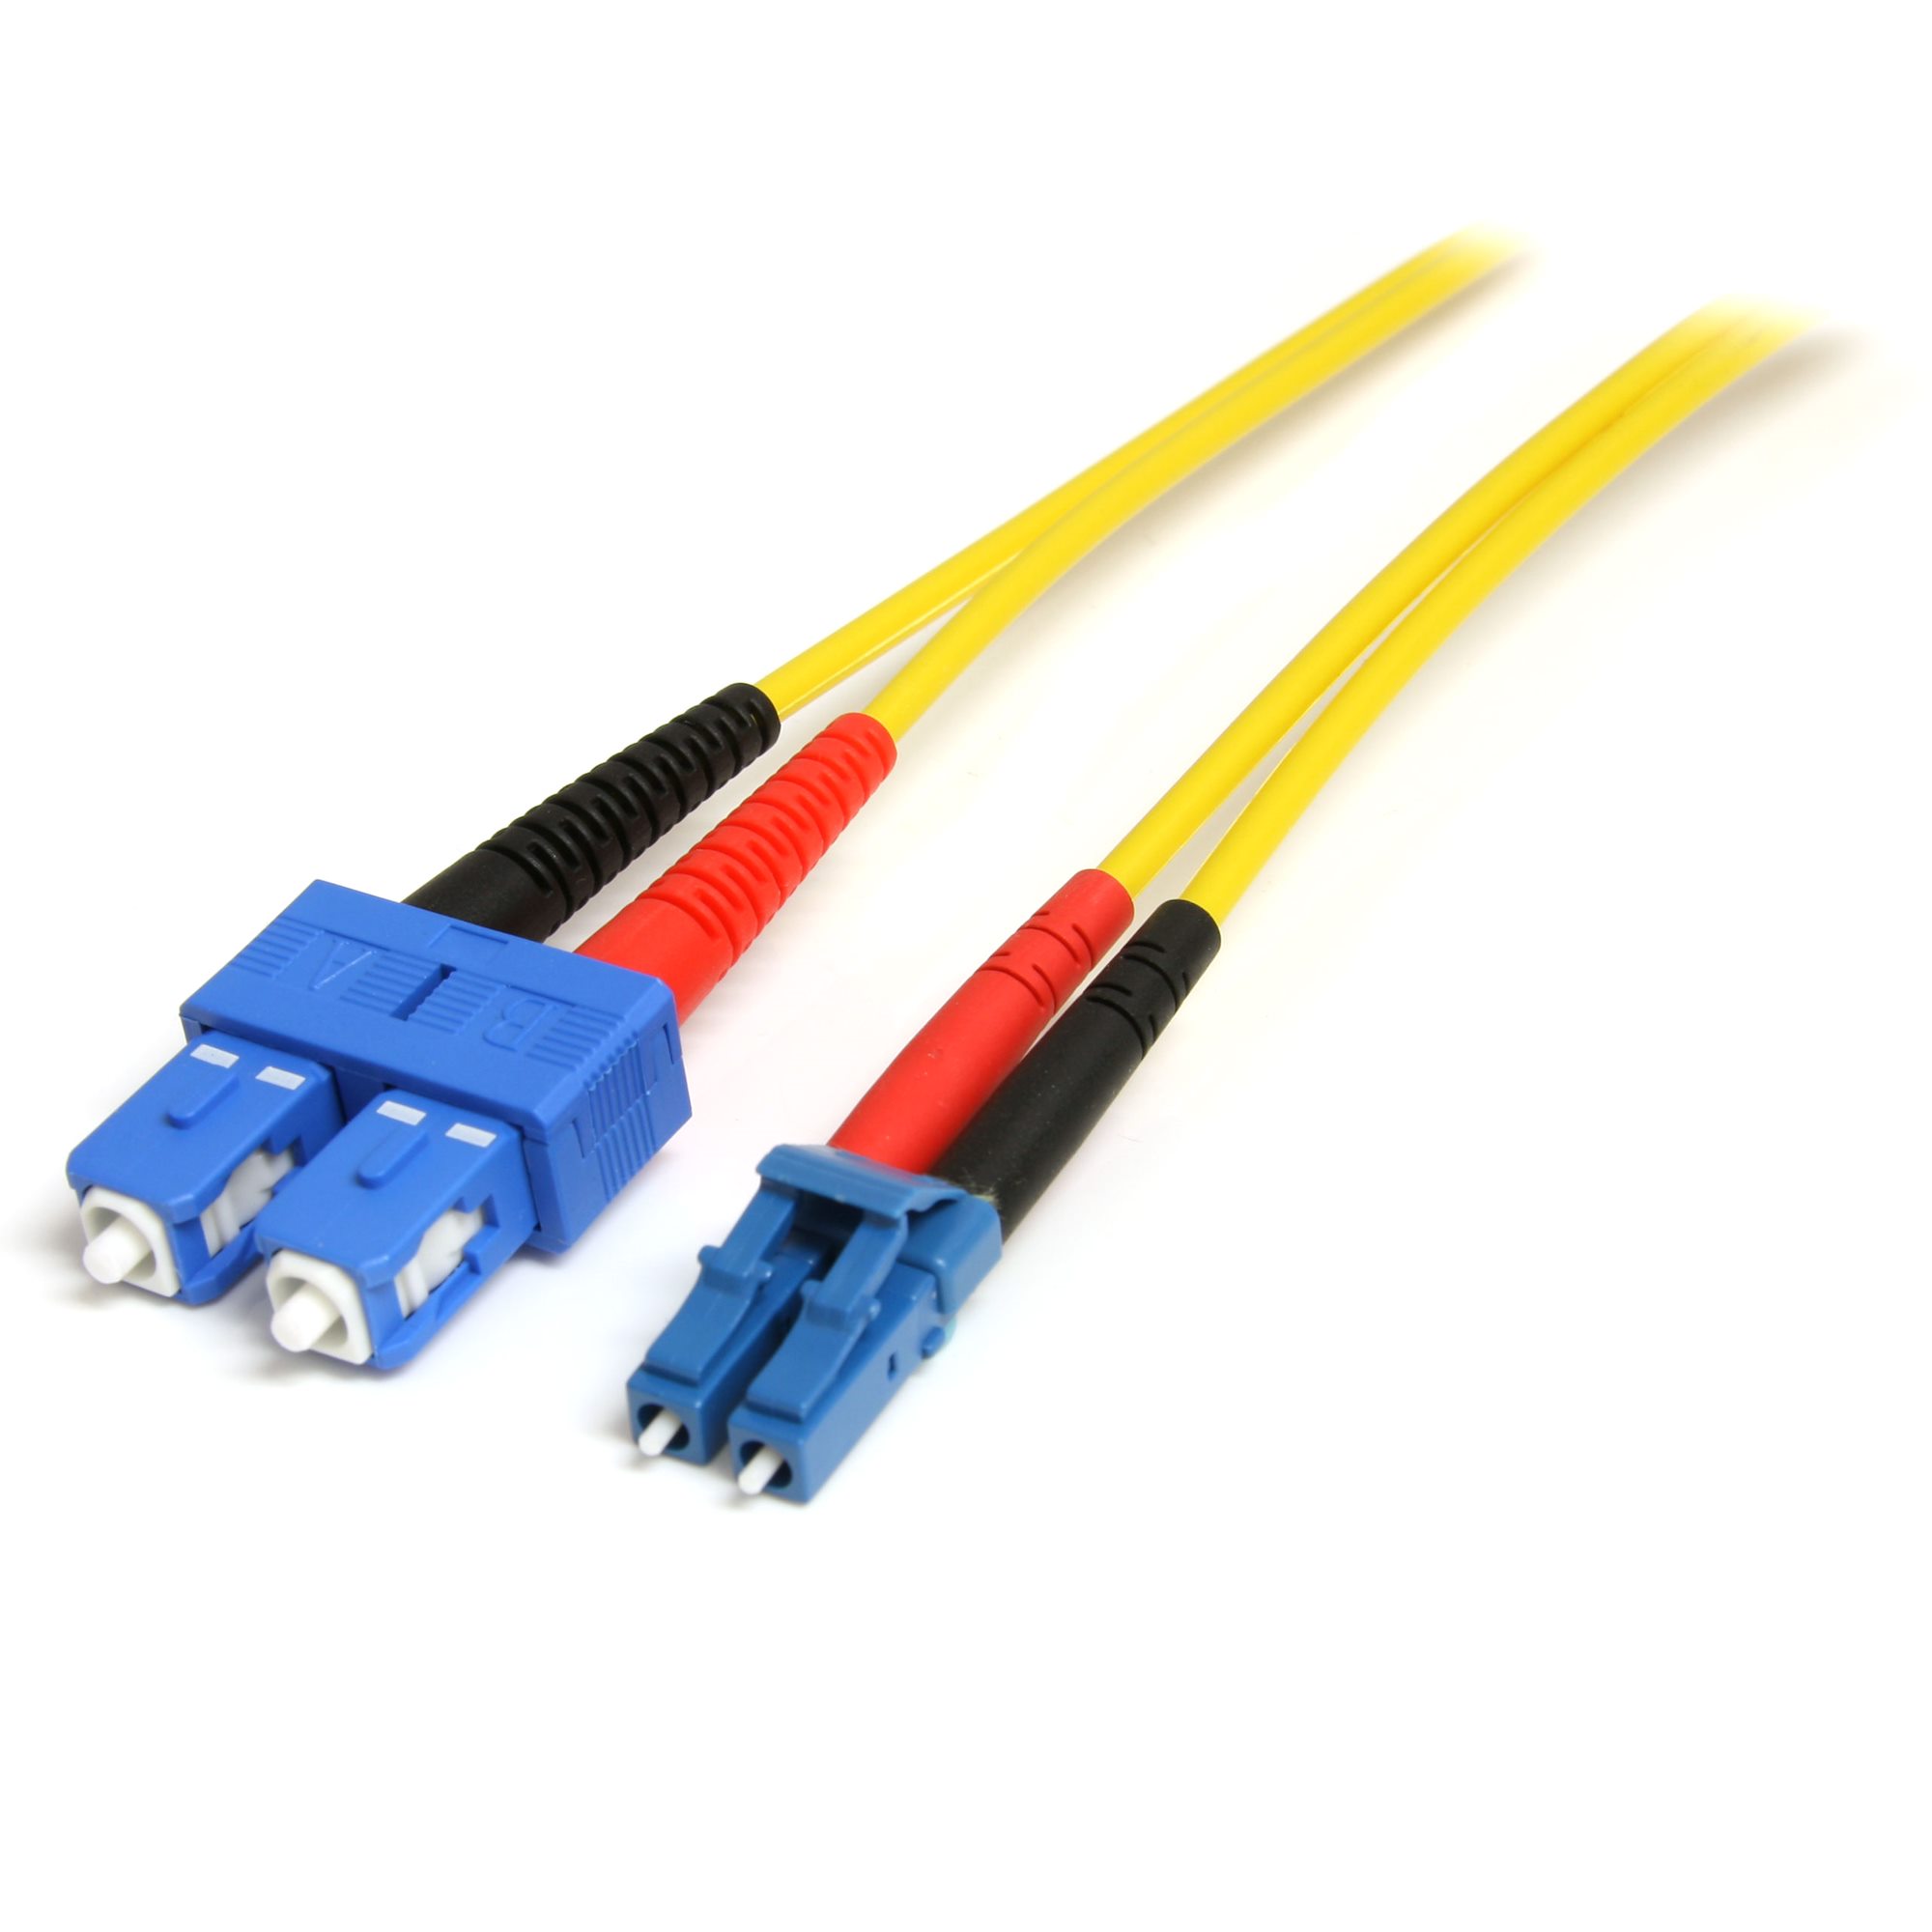 Fiber Optic Adapter Karono LC to SC On-line Transfer Adapter Cable Male & Female Mutual Transfer Singlemode 9/125 Simplex Fiber Optic Cable Hybrid Connector Coupler Converter Dongle 